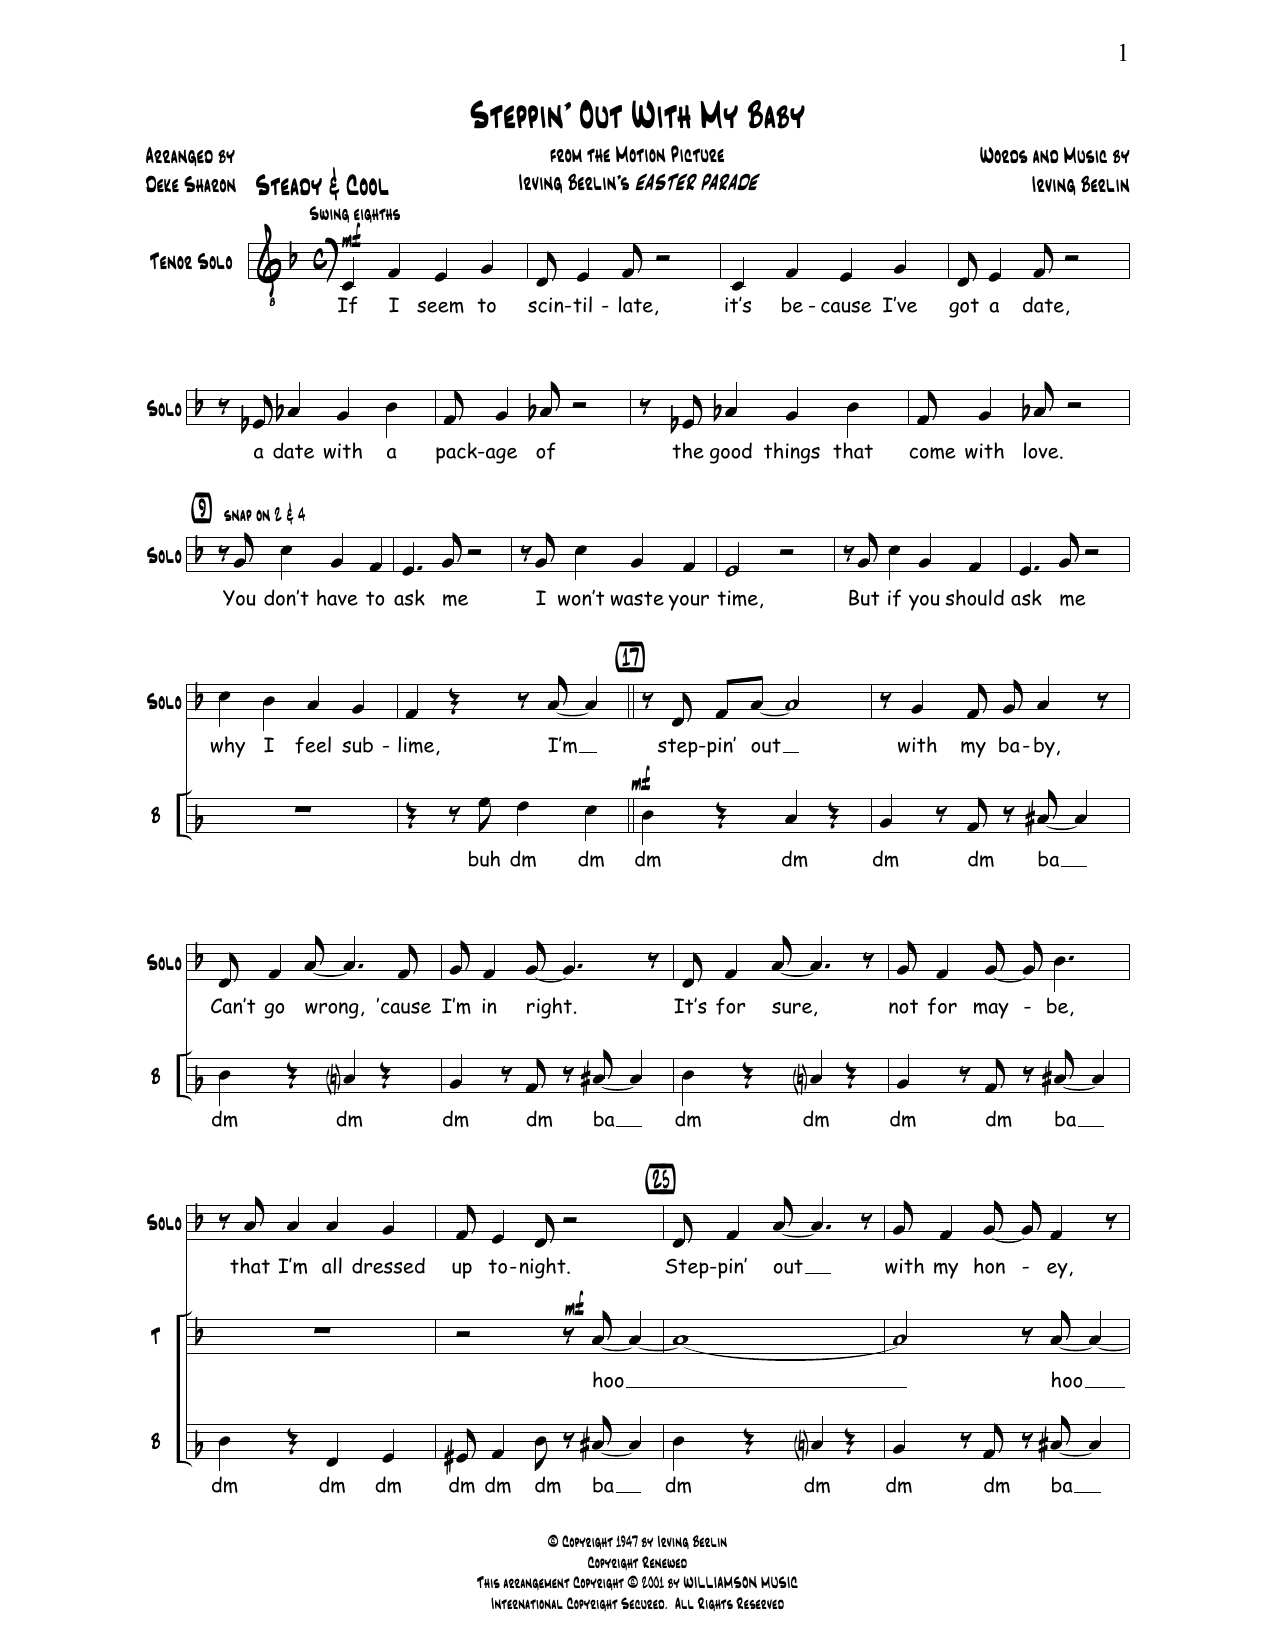 Deke Sharon Steppin' Out With My Baby sheet music notes and chords. Download Printable PDF.